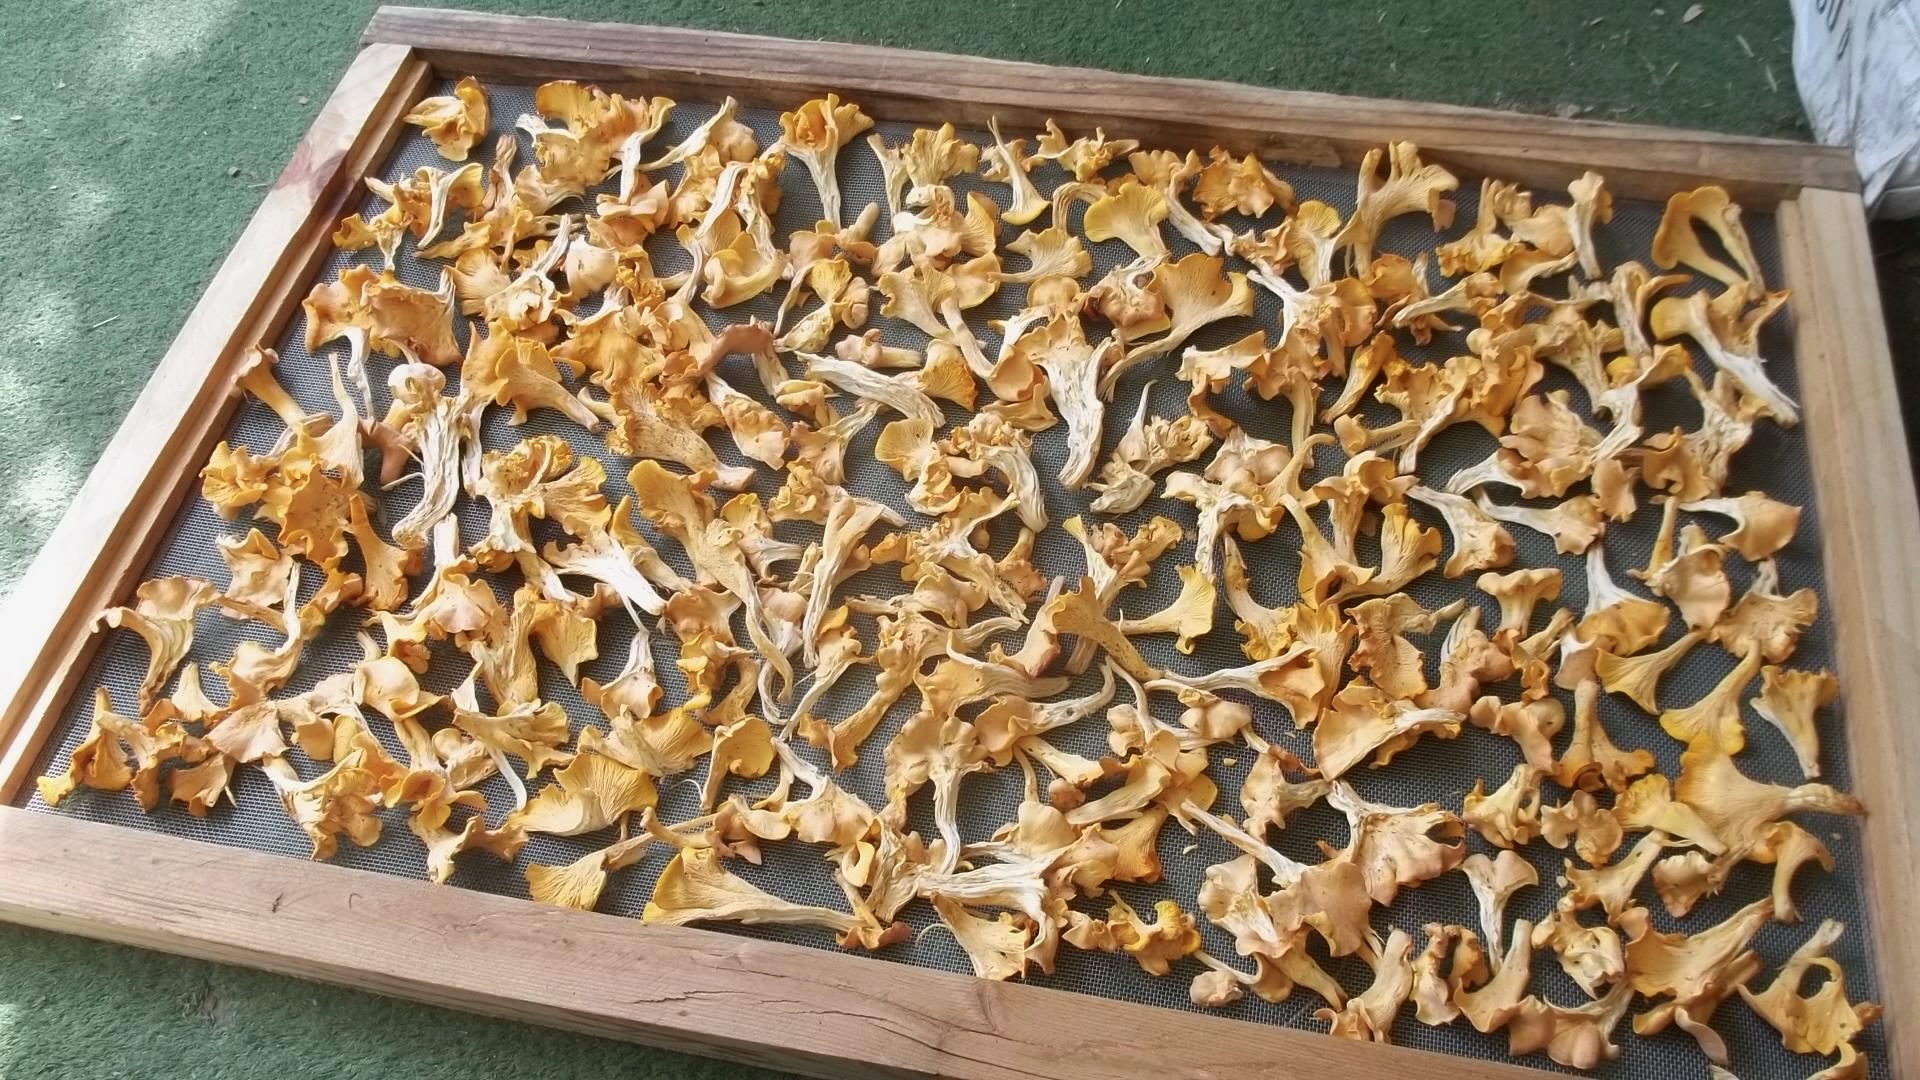 Wild chanterelle mushrooms are laid out on a drying rack.